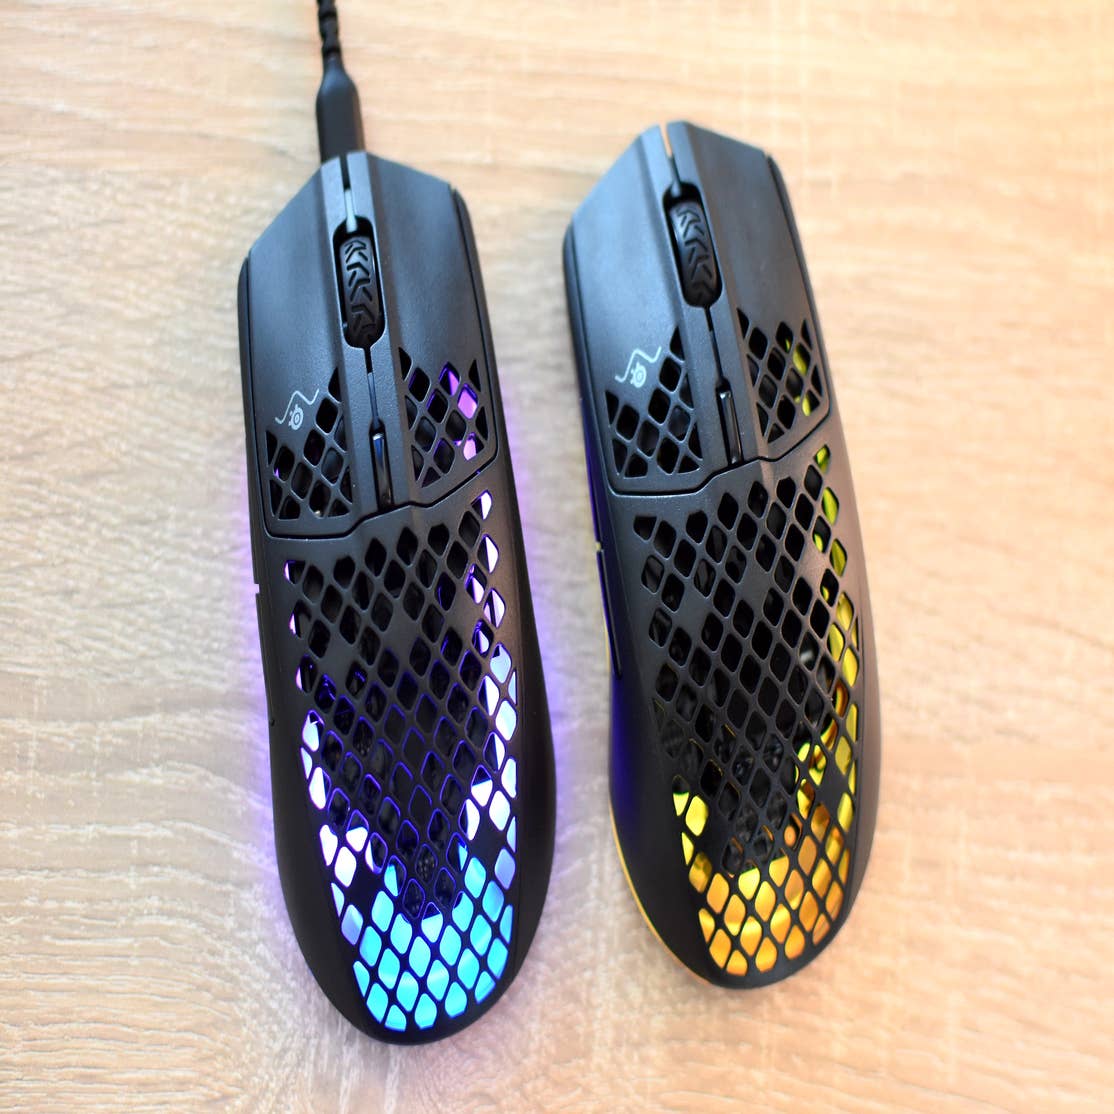 16 Best Gaming Mice and Mousepads (2023): Wireless, Wired, and